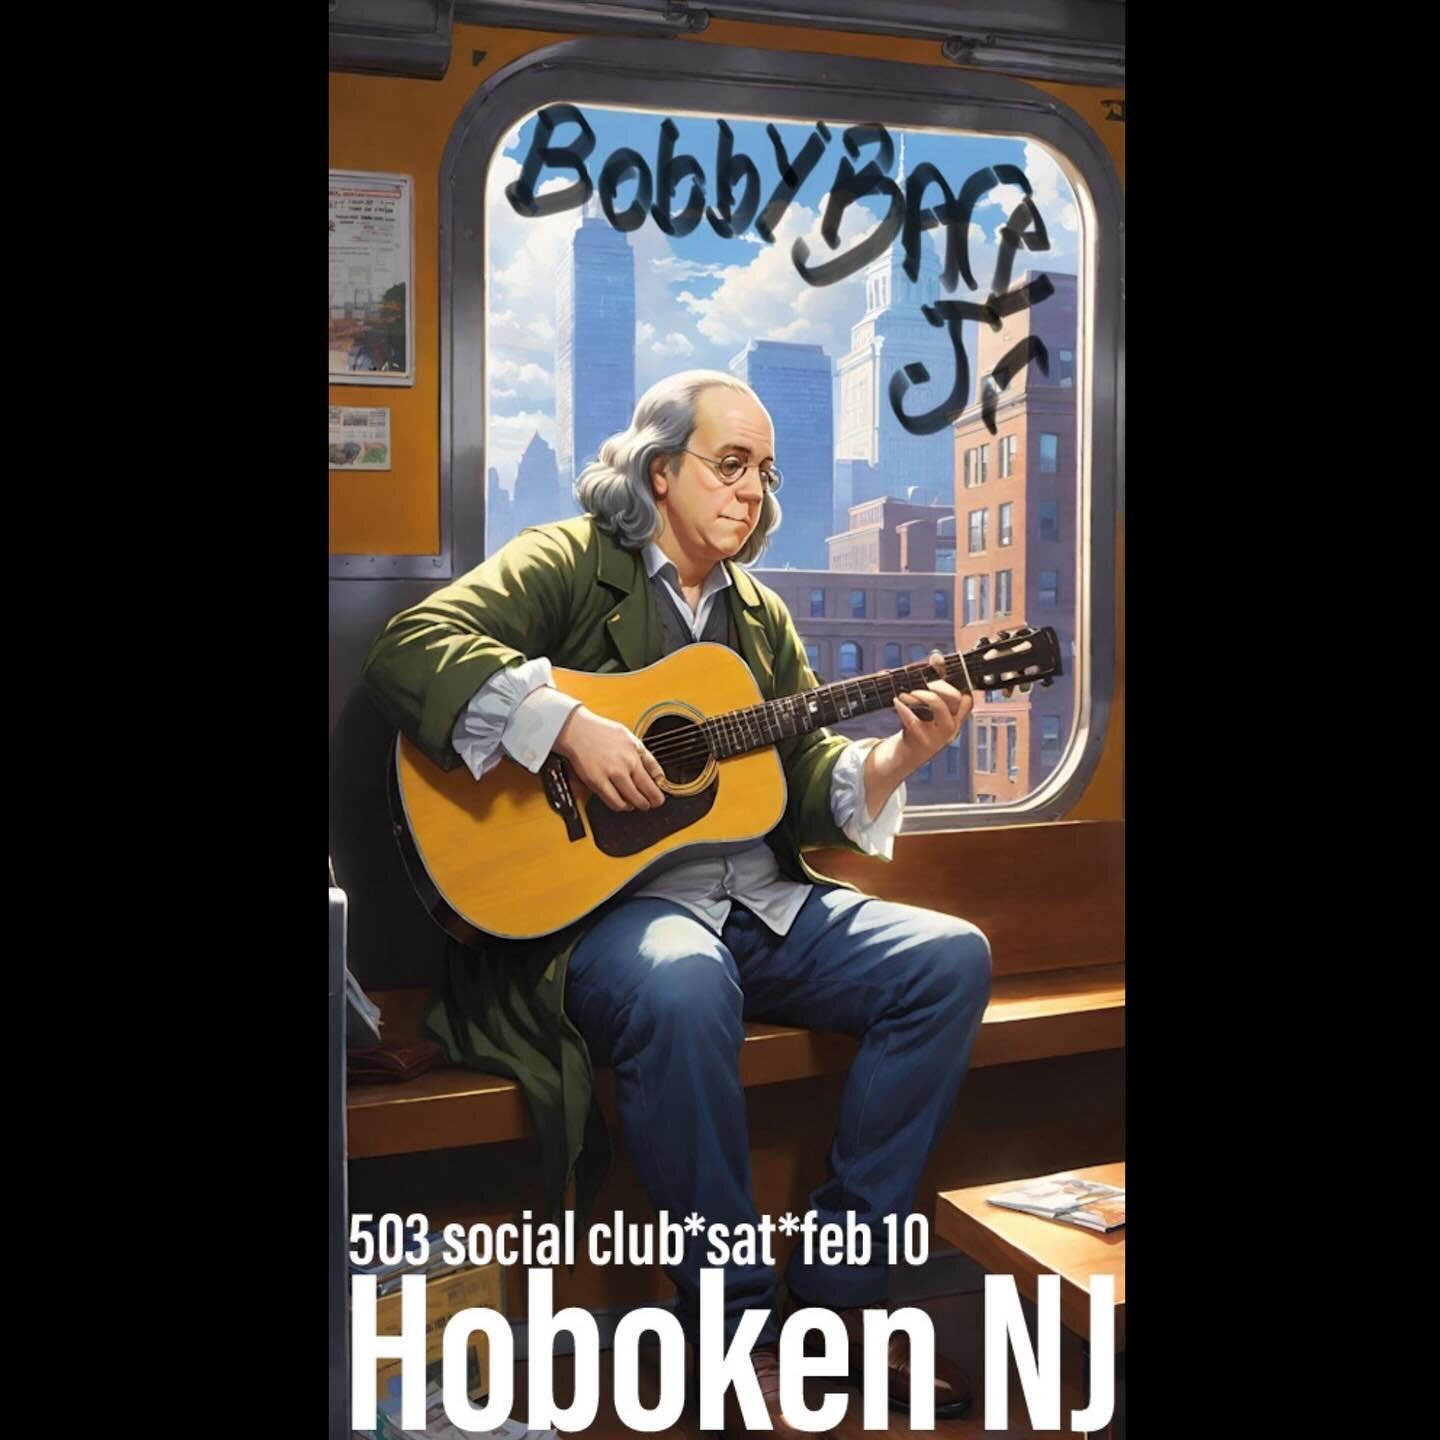 Hoboken tickets are still for sale - -  in Hoboken I am playing 503 social club - tonight - Feb 10, 7pm! Solo acoustic - Tix $20advance/ $25 door. BYOB. Purchase @guitarbar @guitarbarjerseycity or Venmo $20 to @Guitar-Bar